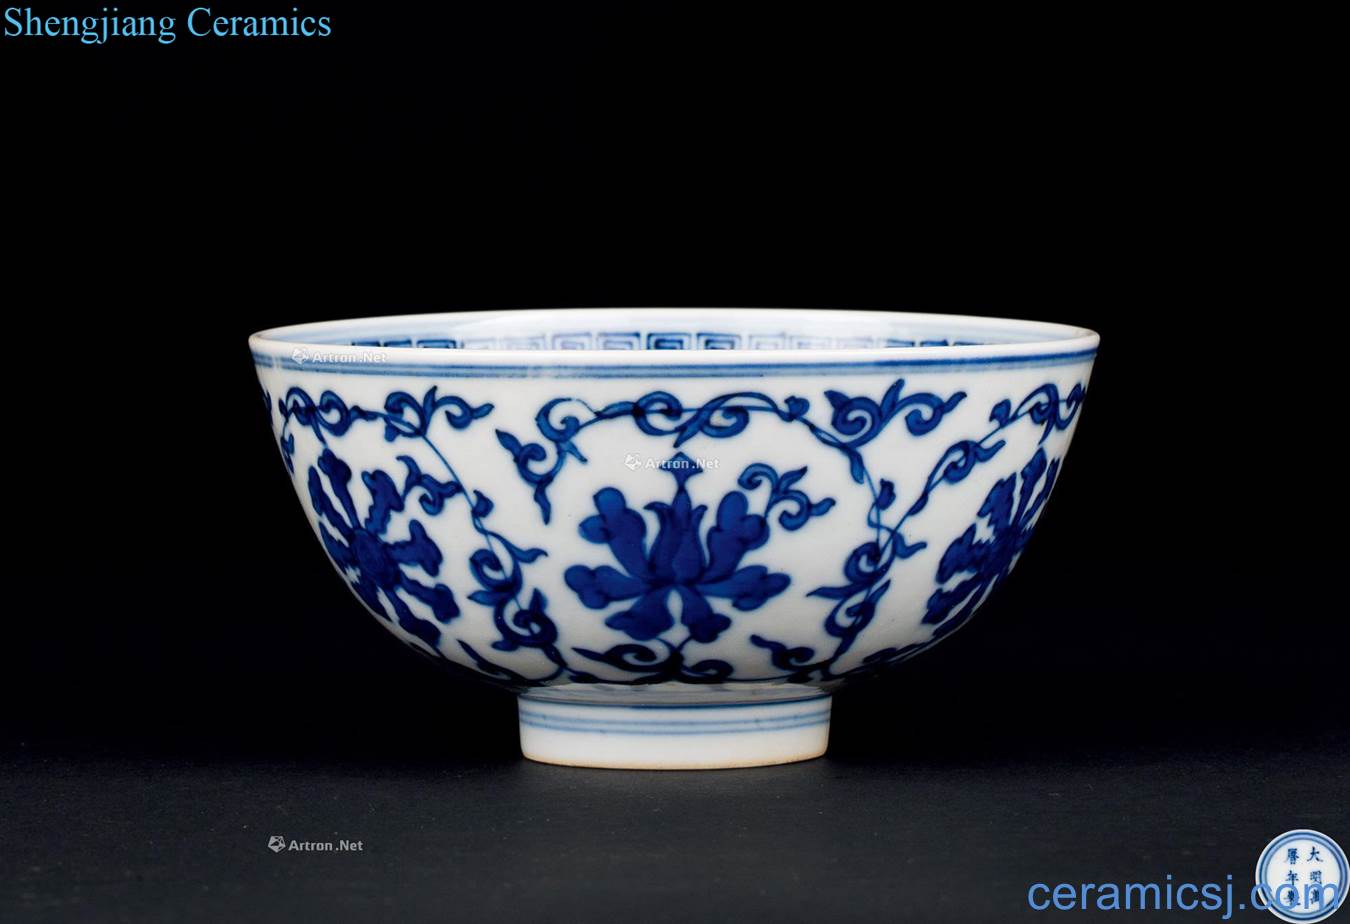 In the qing dynasty (1644-1911) blue and white flower green-splashed bowls